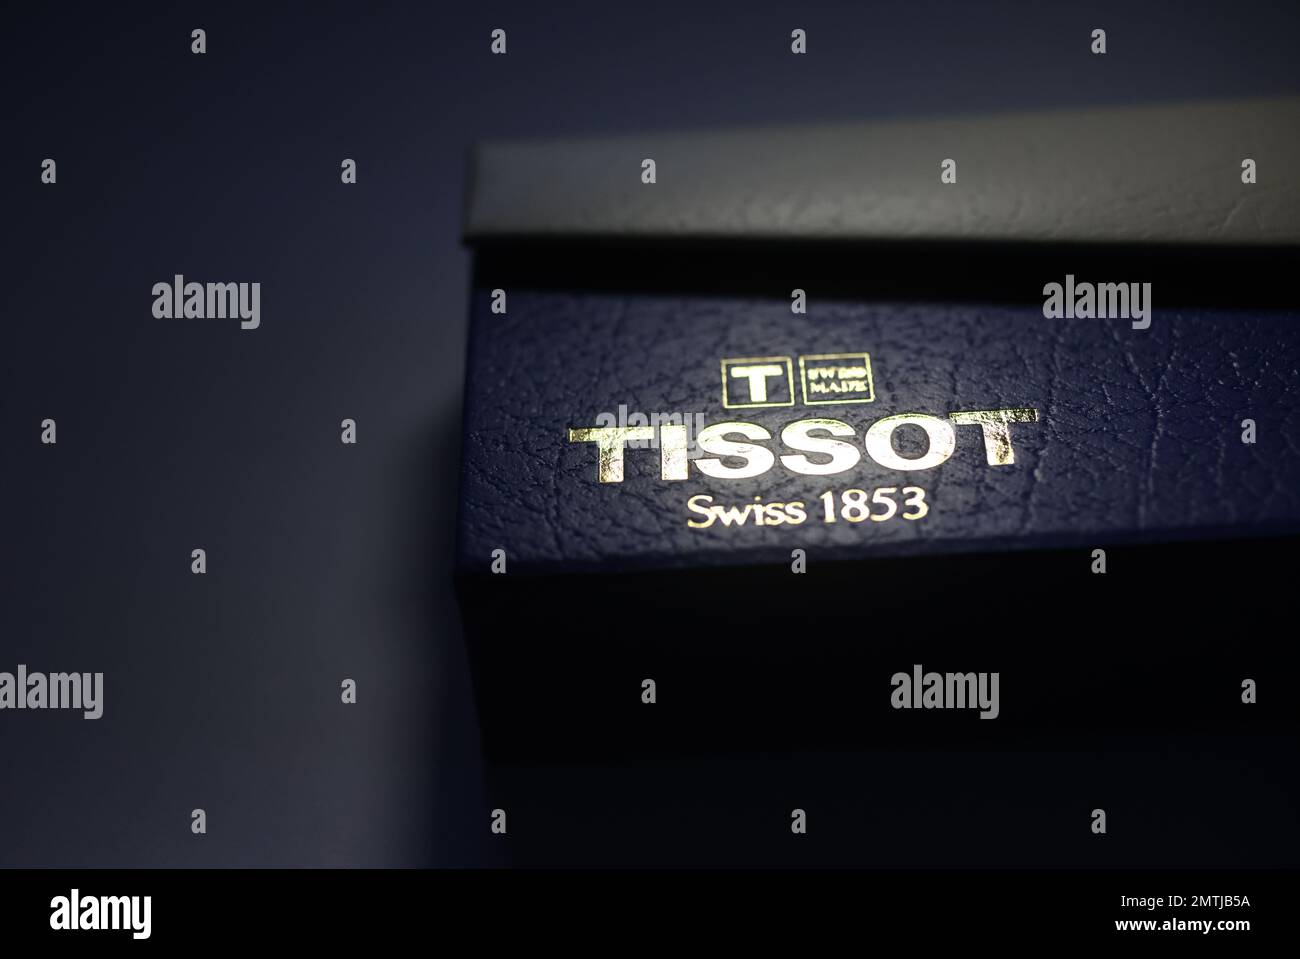 Tissot SA is a Swiss watchmaker. Stock Photo